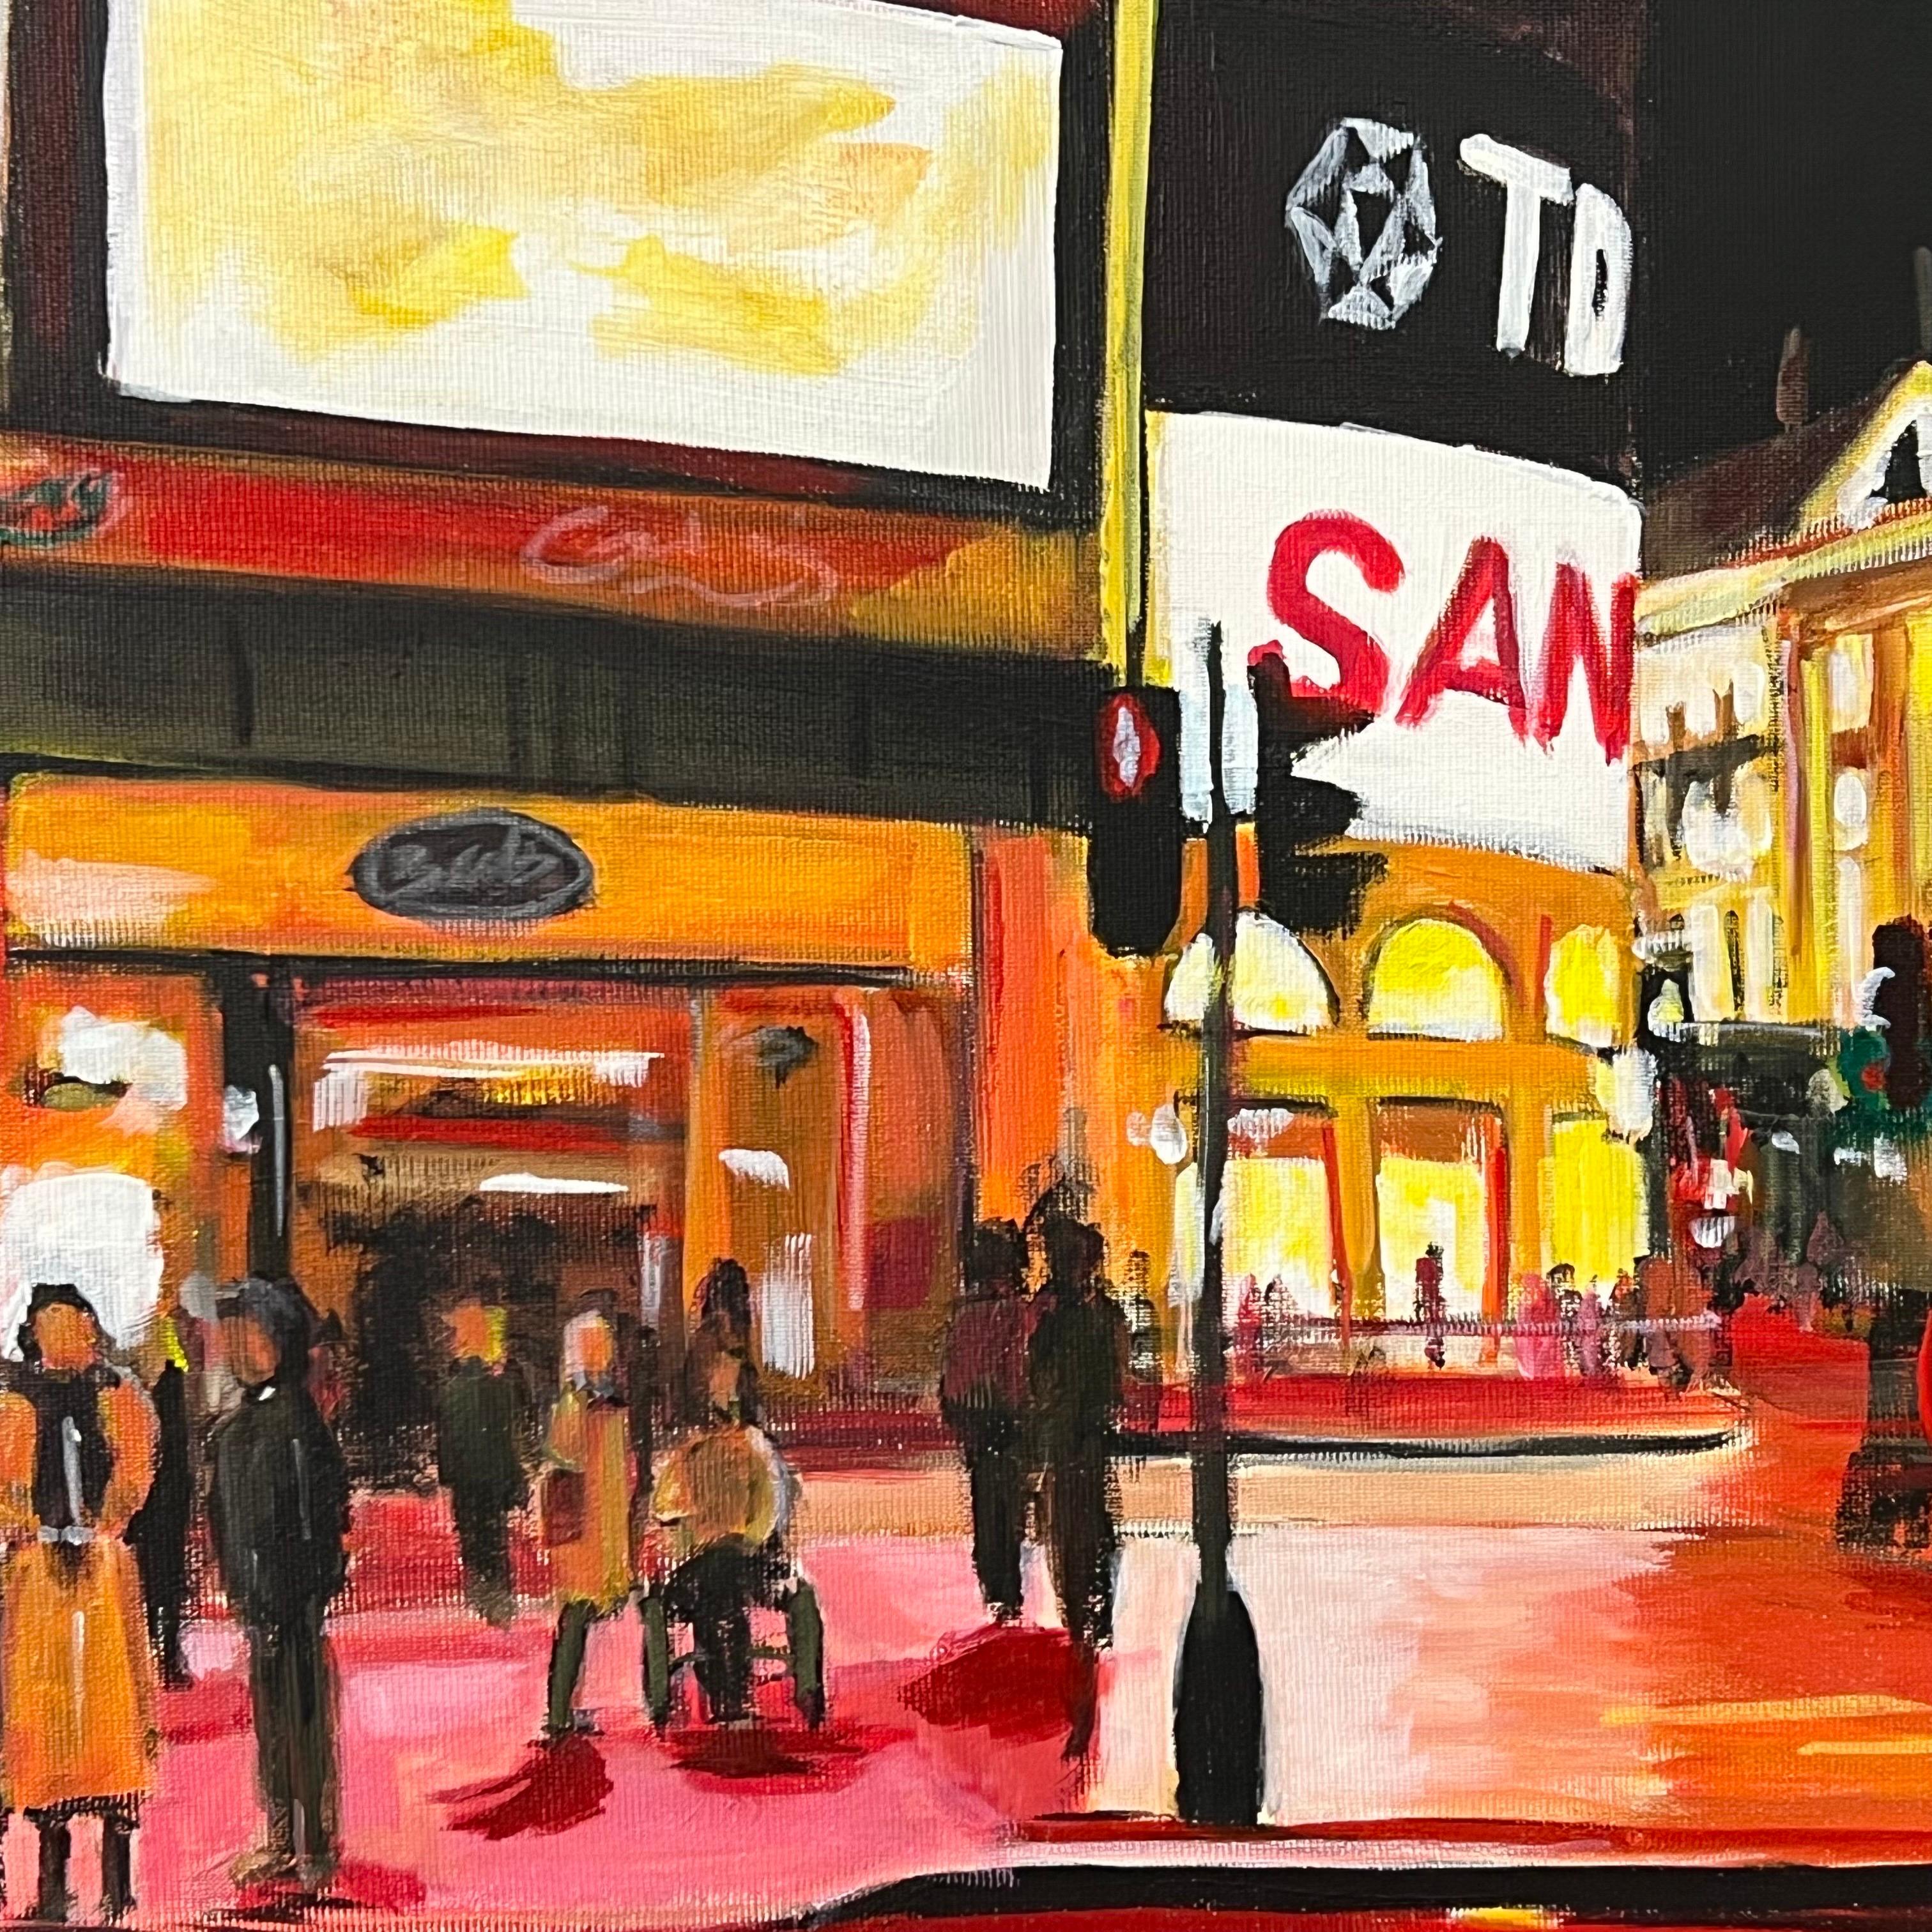 Piccadilly Circus in London City at Night with Red Bus by Urban Landscape Artist For Sale 9